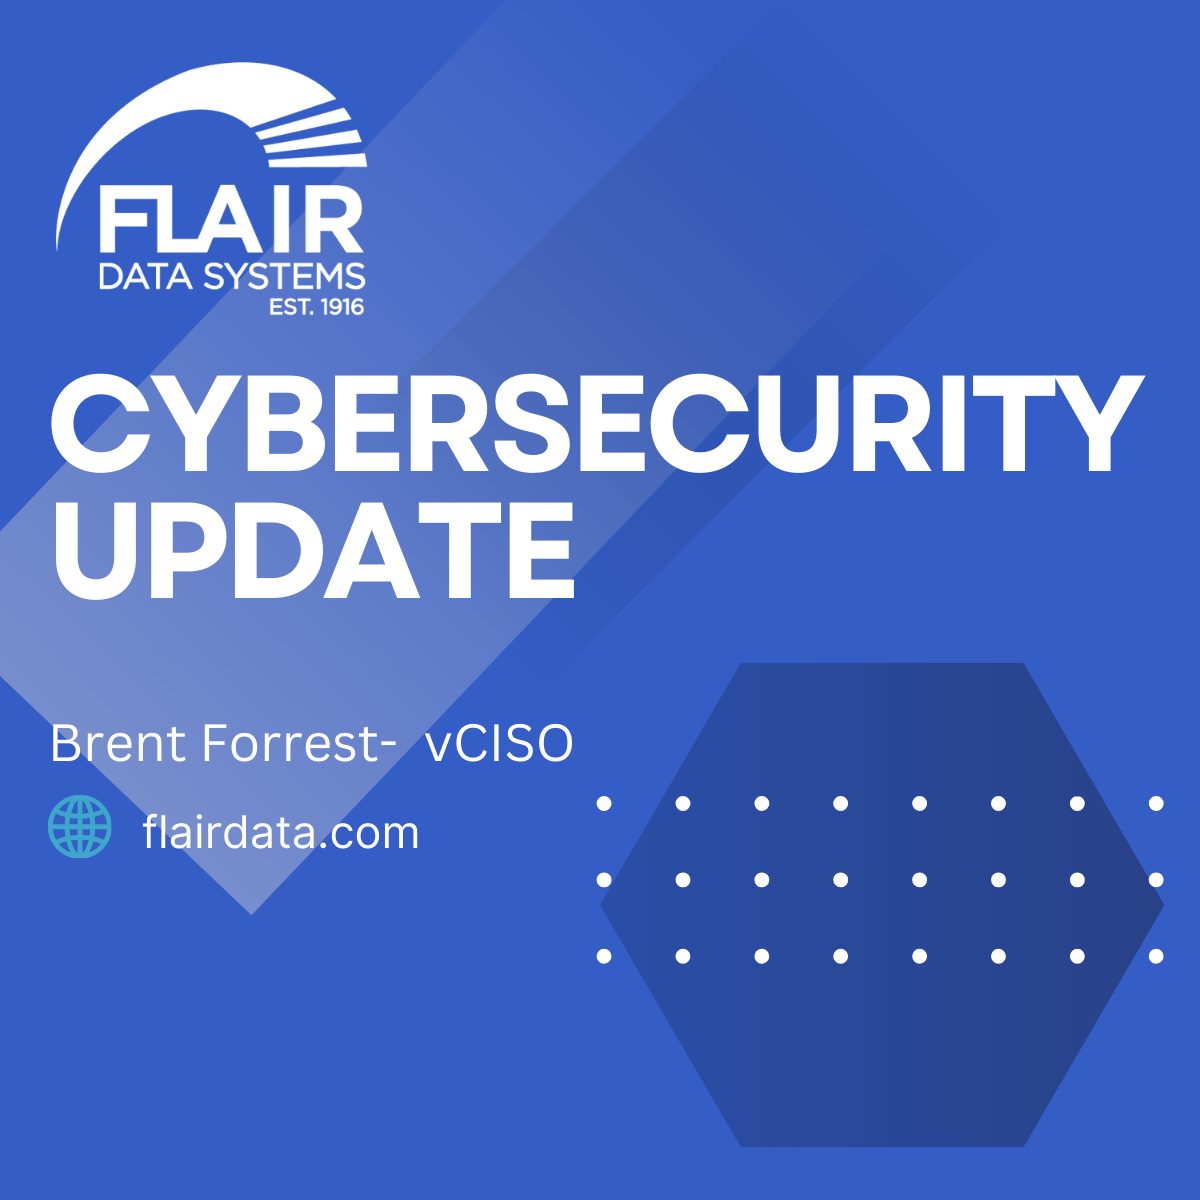 Brent Forrest, vCISO at Flair Data Systems, gives his weekly cybersecurity news update